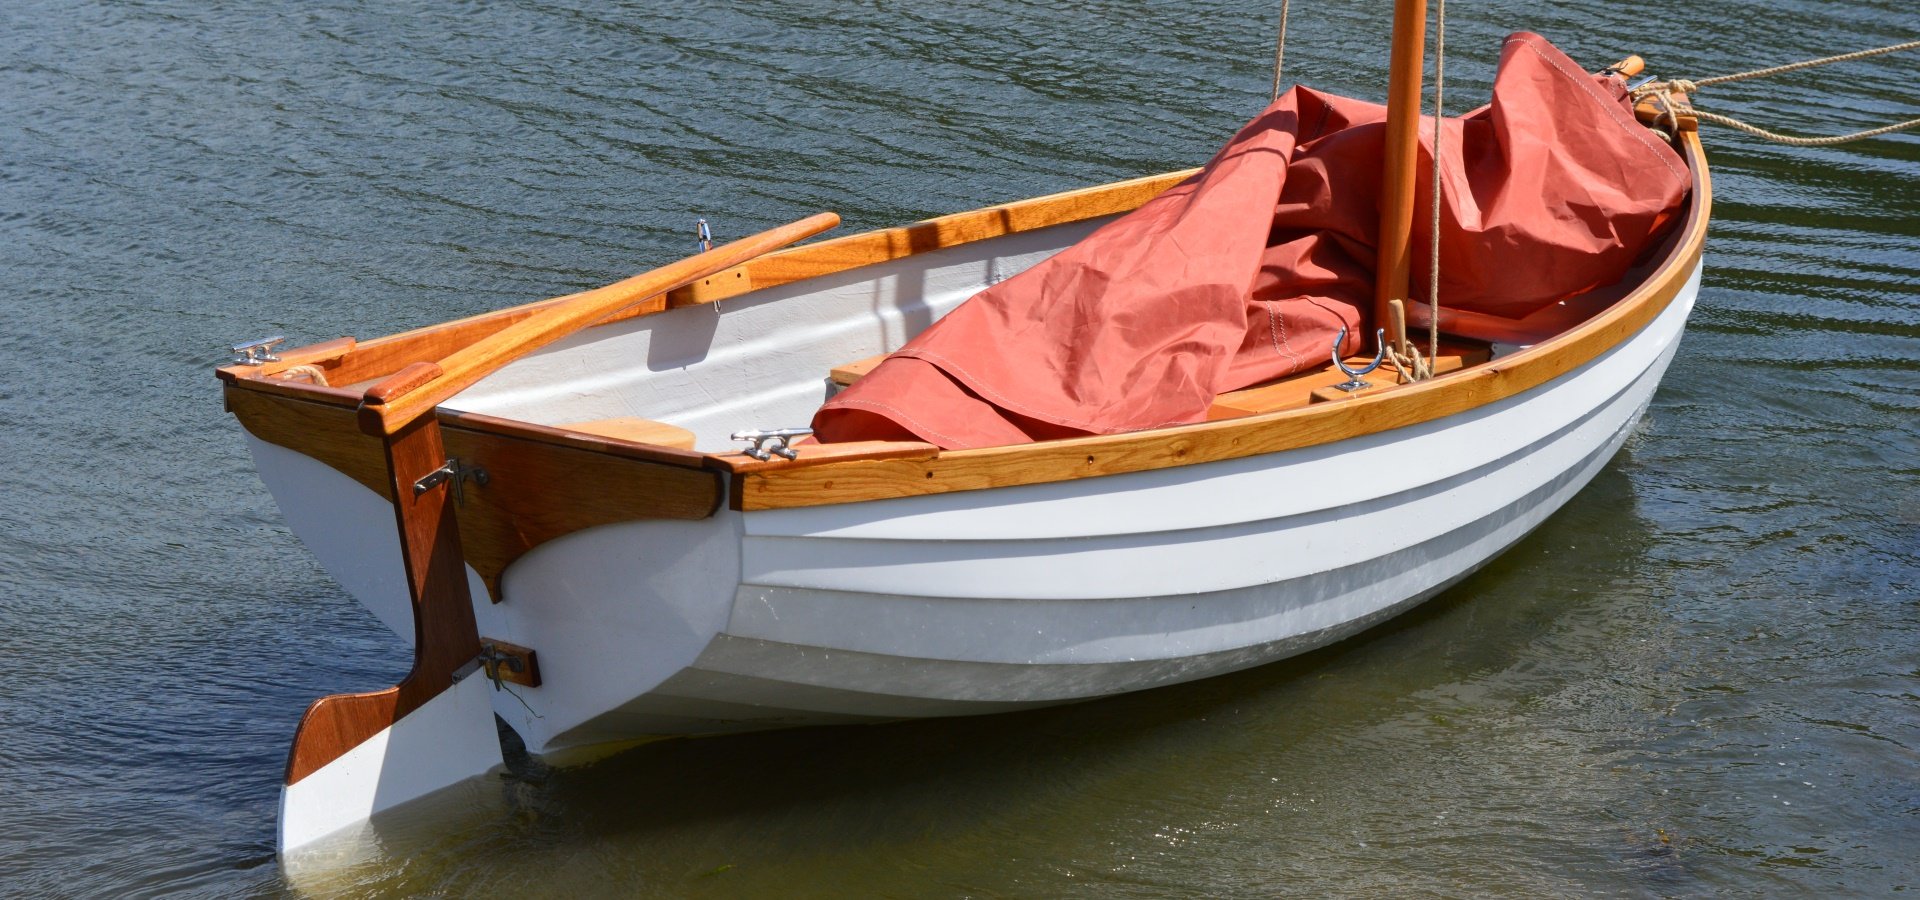 Skur 9ft Naw Rowing Dinghy